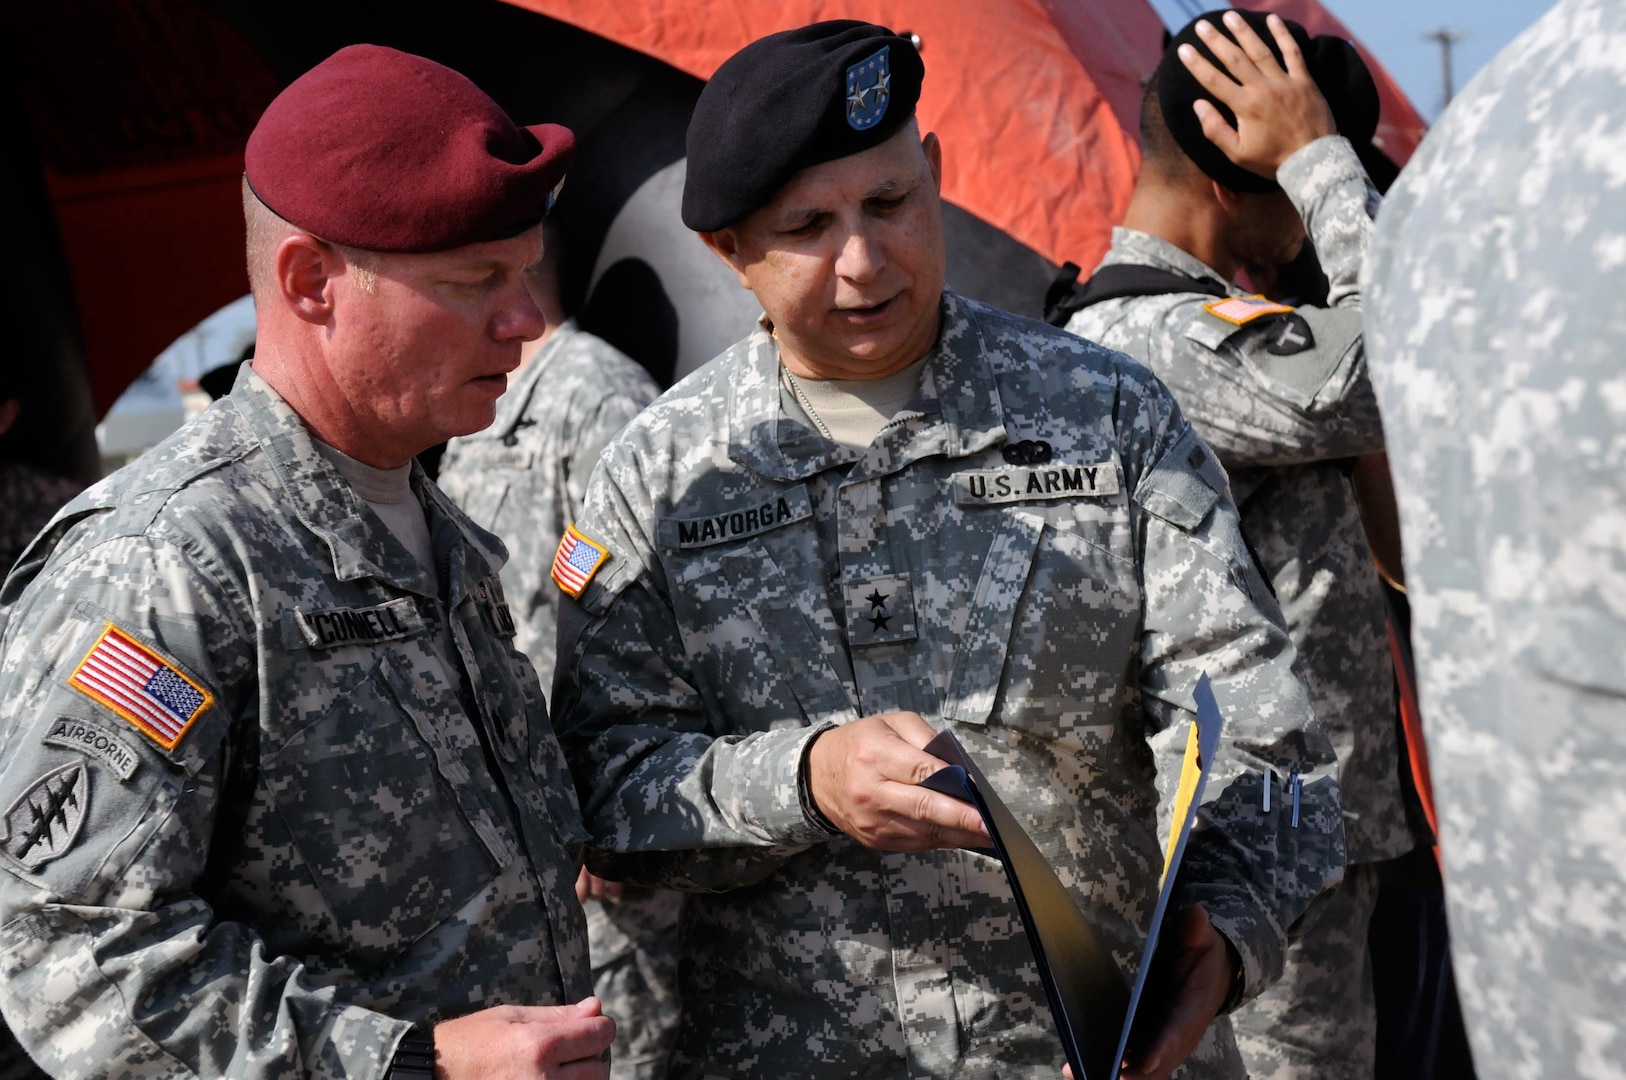 Lt. Col. Douglas of O'Connell, commander of 1st Battalion of the 143rd Infantry Regiment (Airborne), talks with Maj. Gen. Jose S. Mayorga, the adjutant general of the Texas National Guard, after the reactivation ceremony of the 1st Battalion of the 143rd Infantry Regiment (Airborne) at the Texas State Technical College airport in Waco, Texas, Sept. 11, 2010.